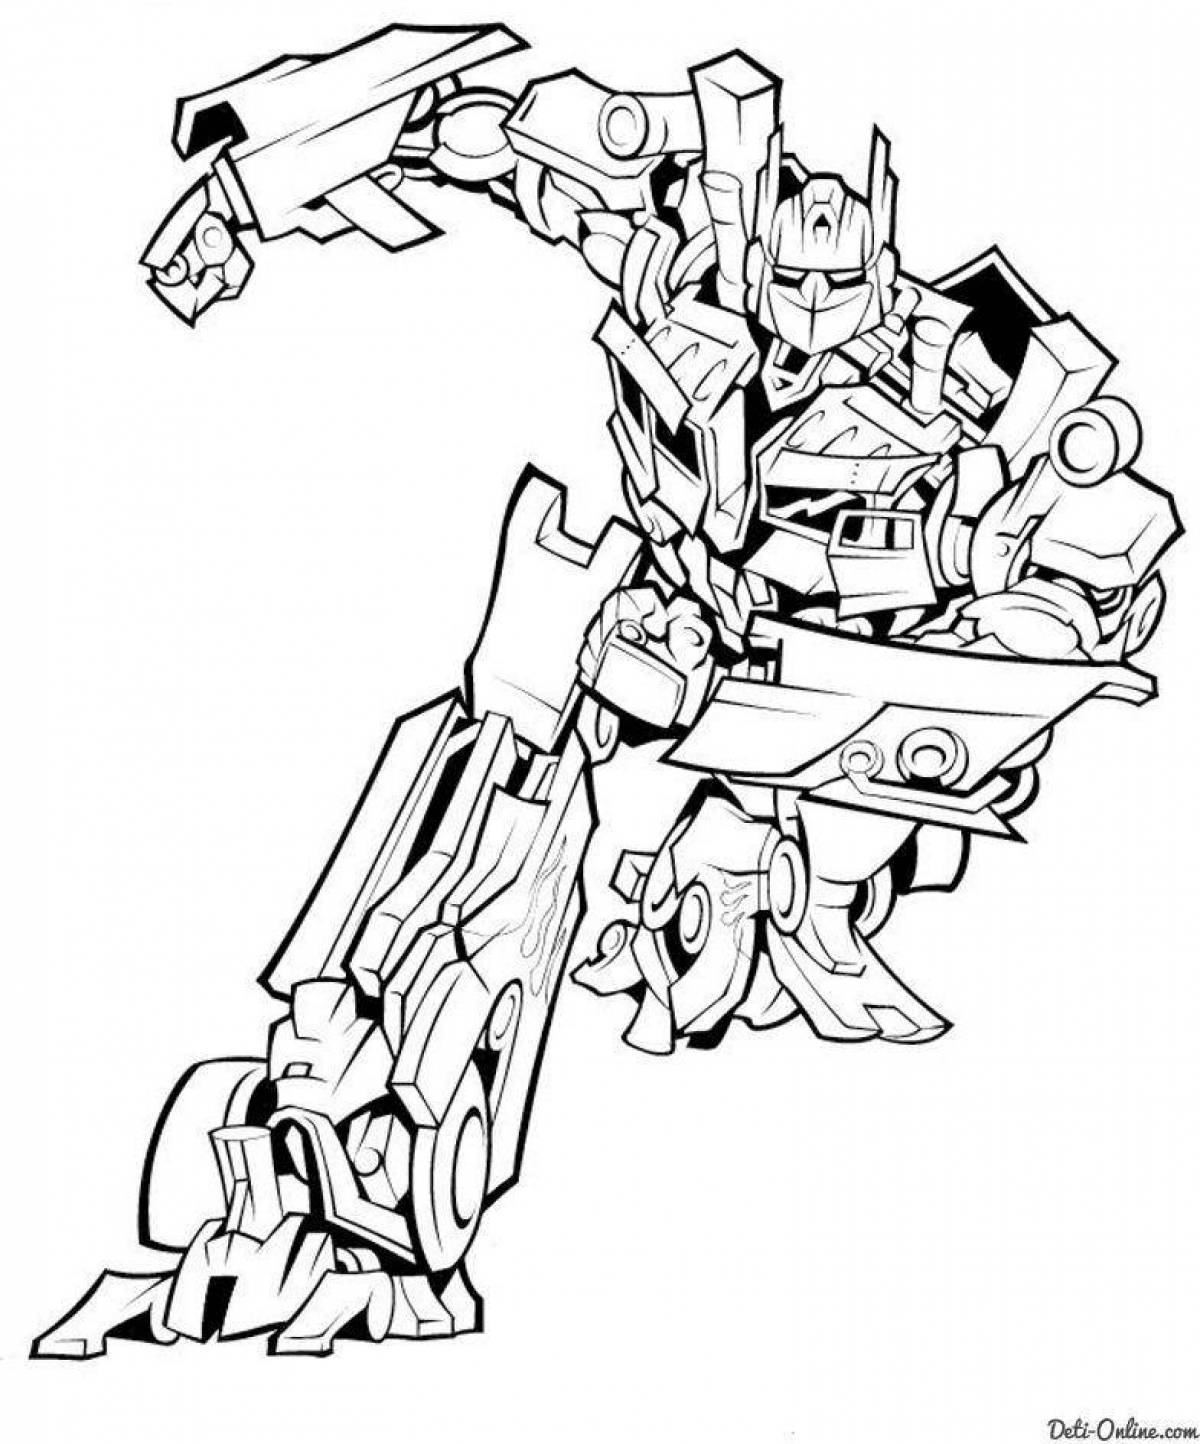 Optimus playful coloring page